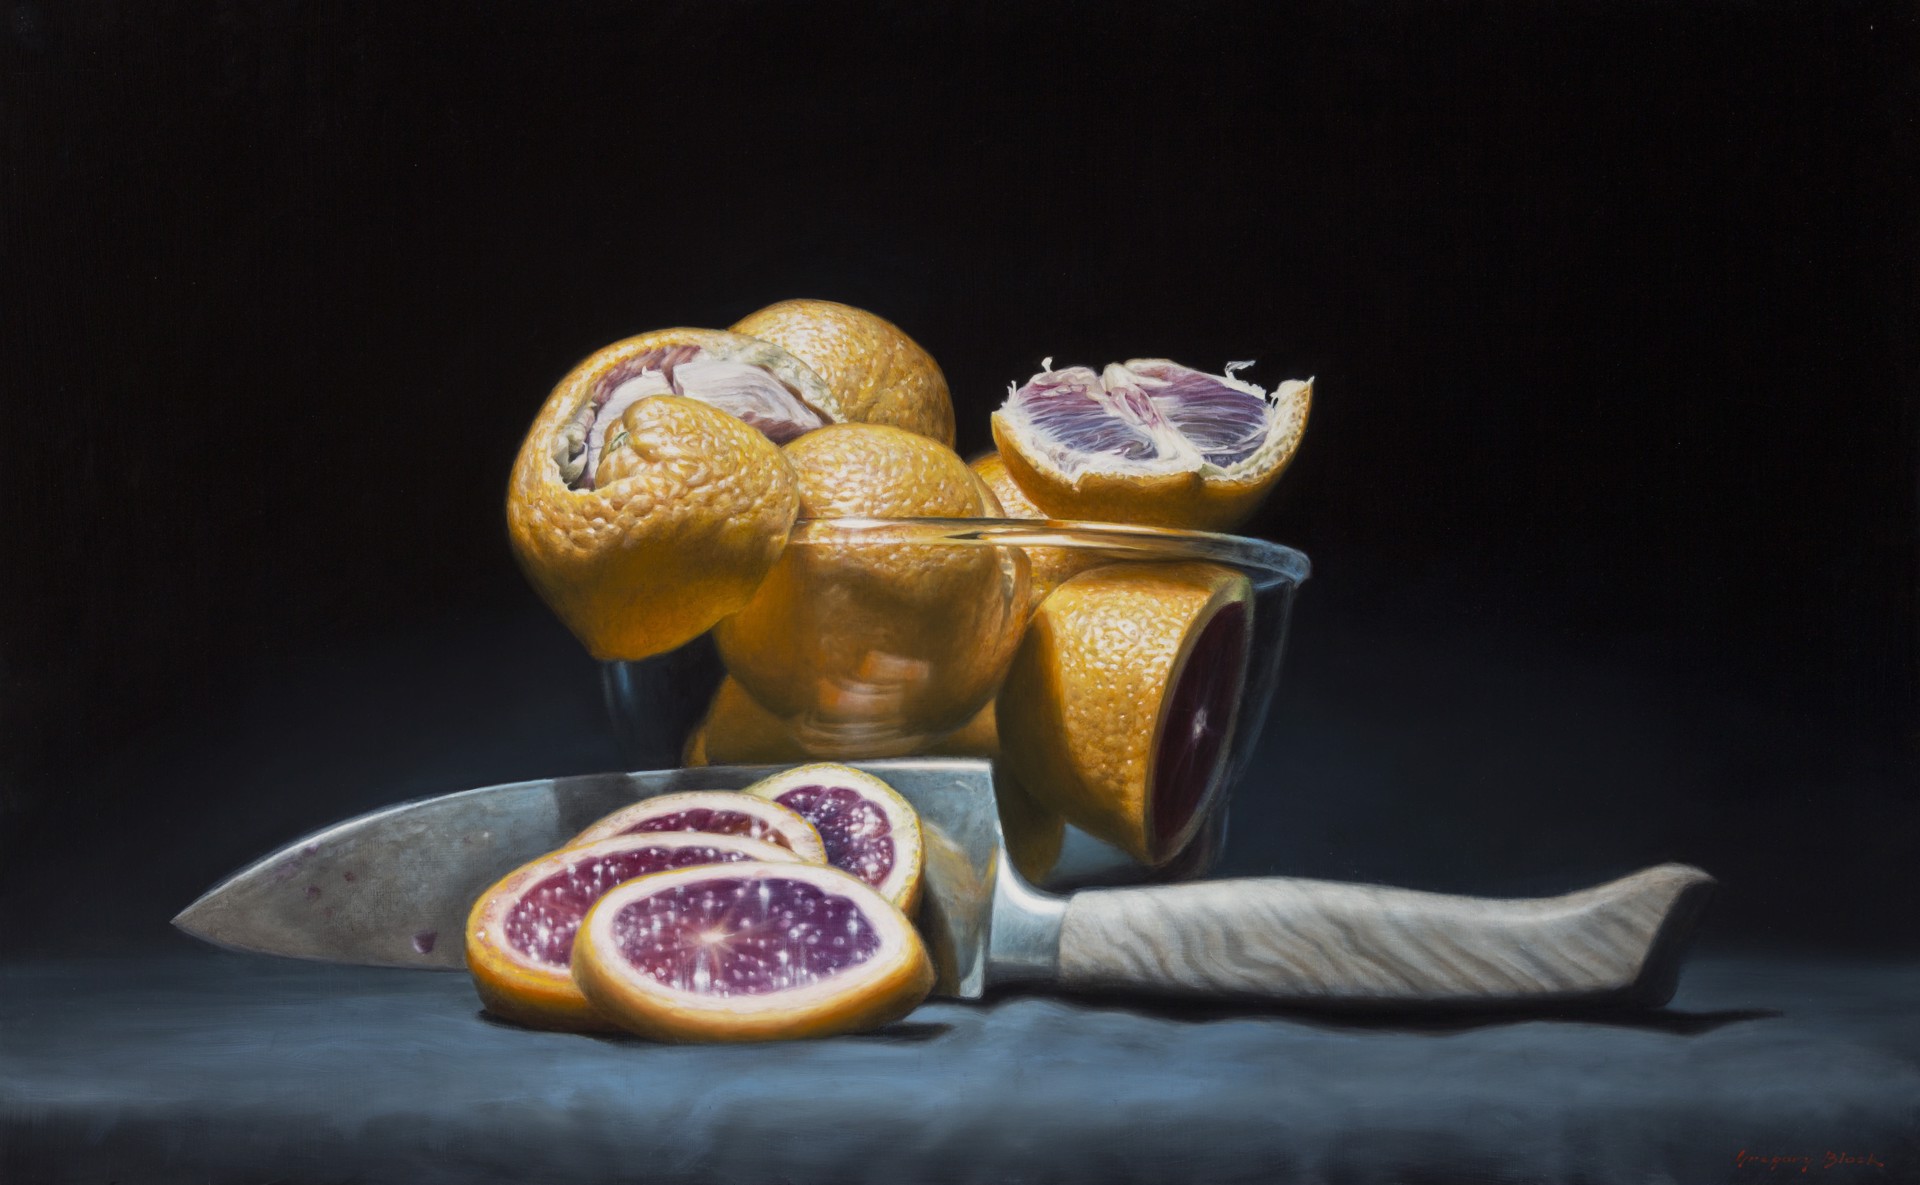 Blood Oranges by Gregory Block